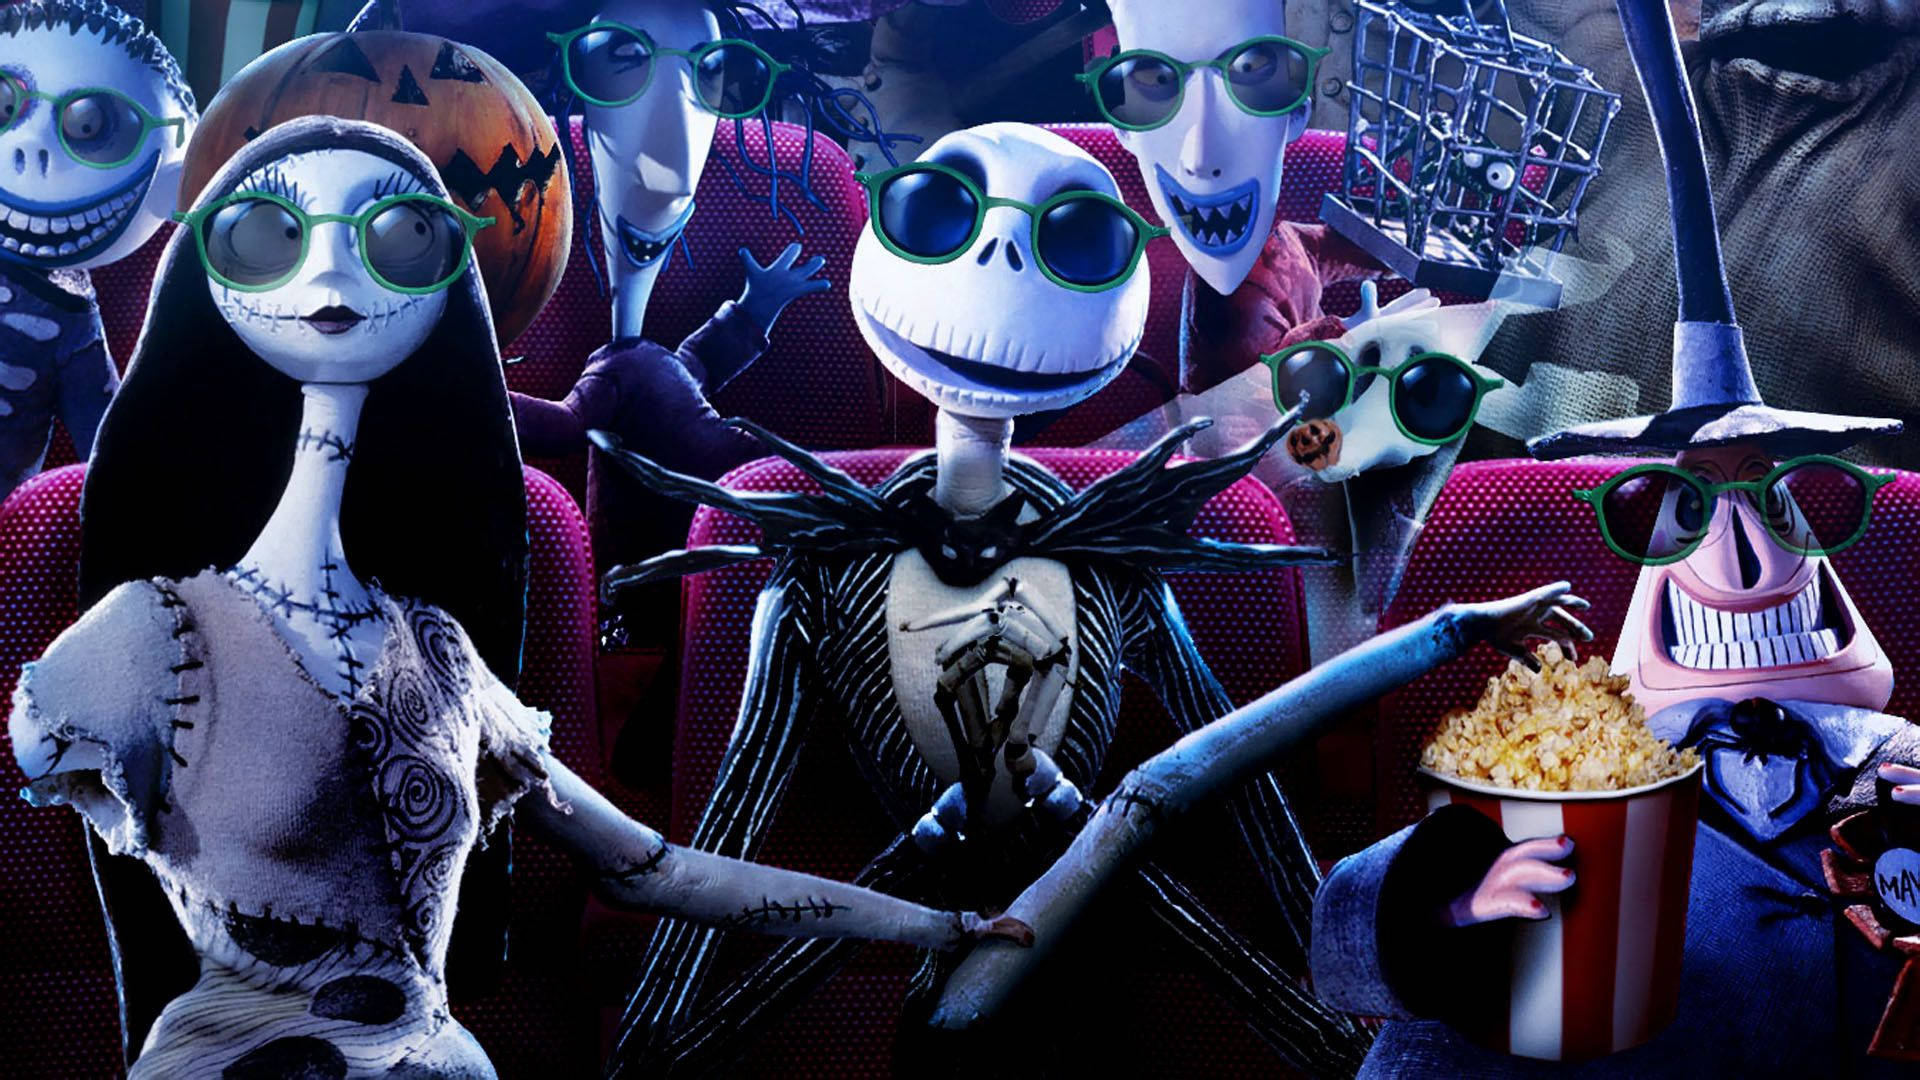 Celebrate Halloween with Jack Skellington and The Nightmare Before Christmas Wallpaper